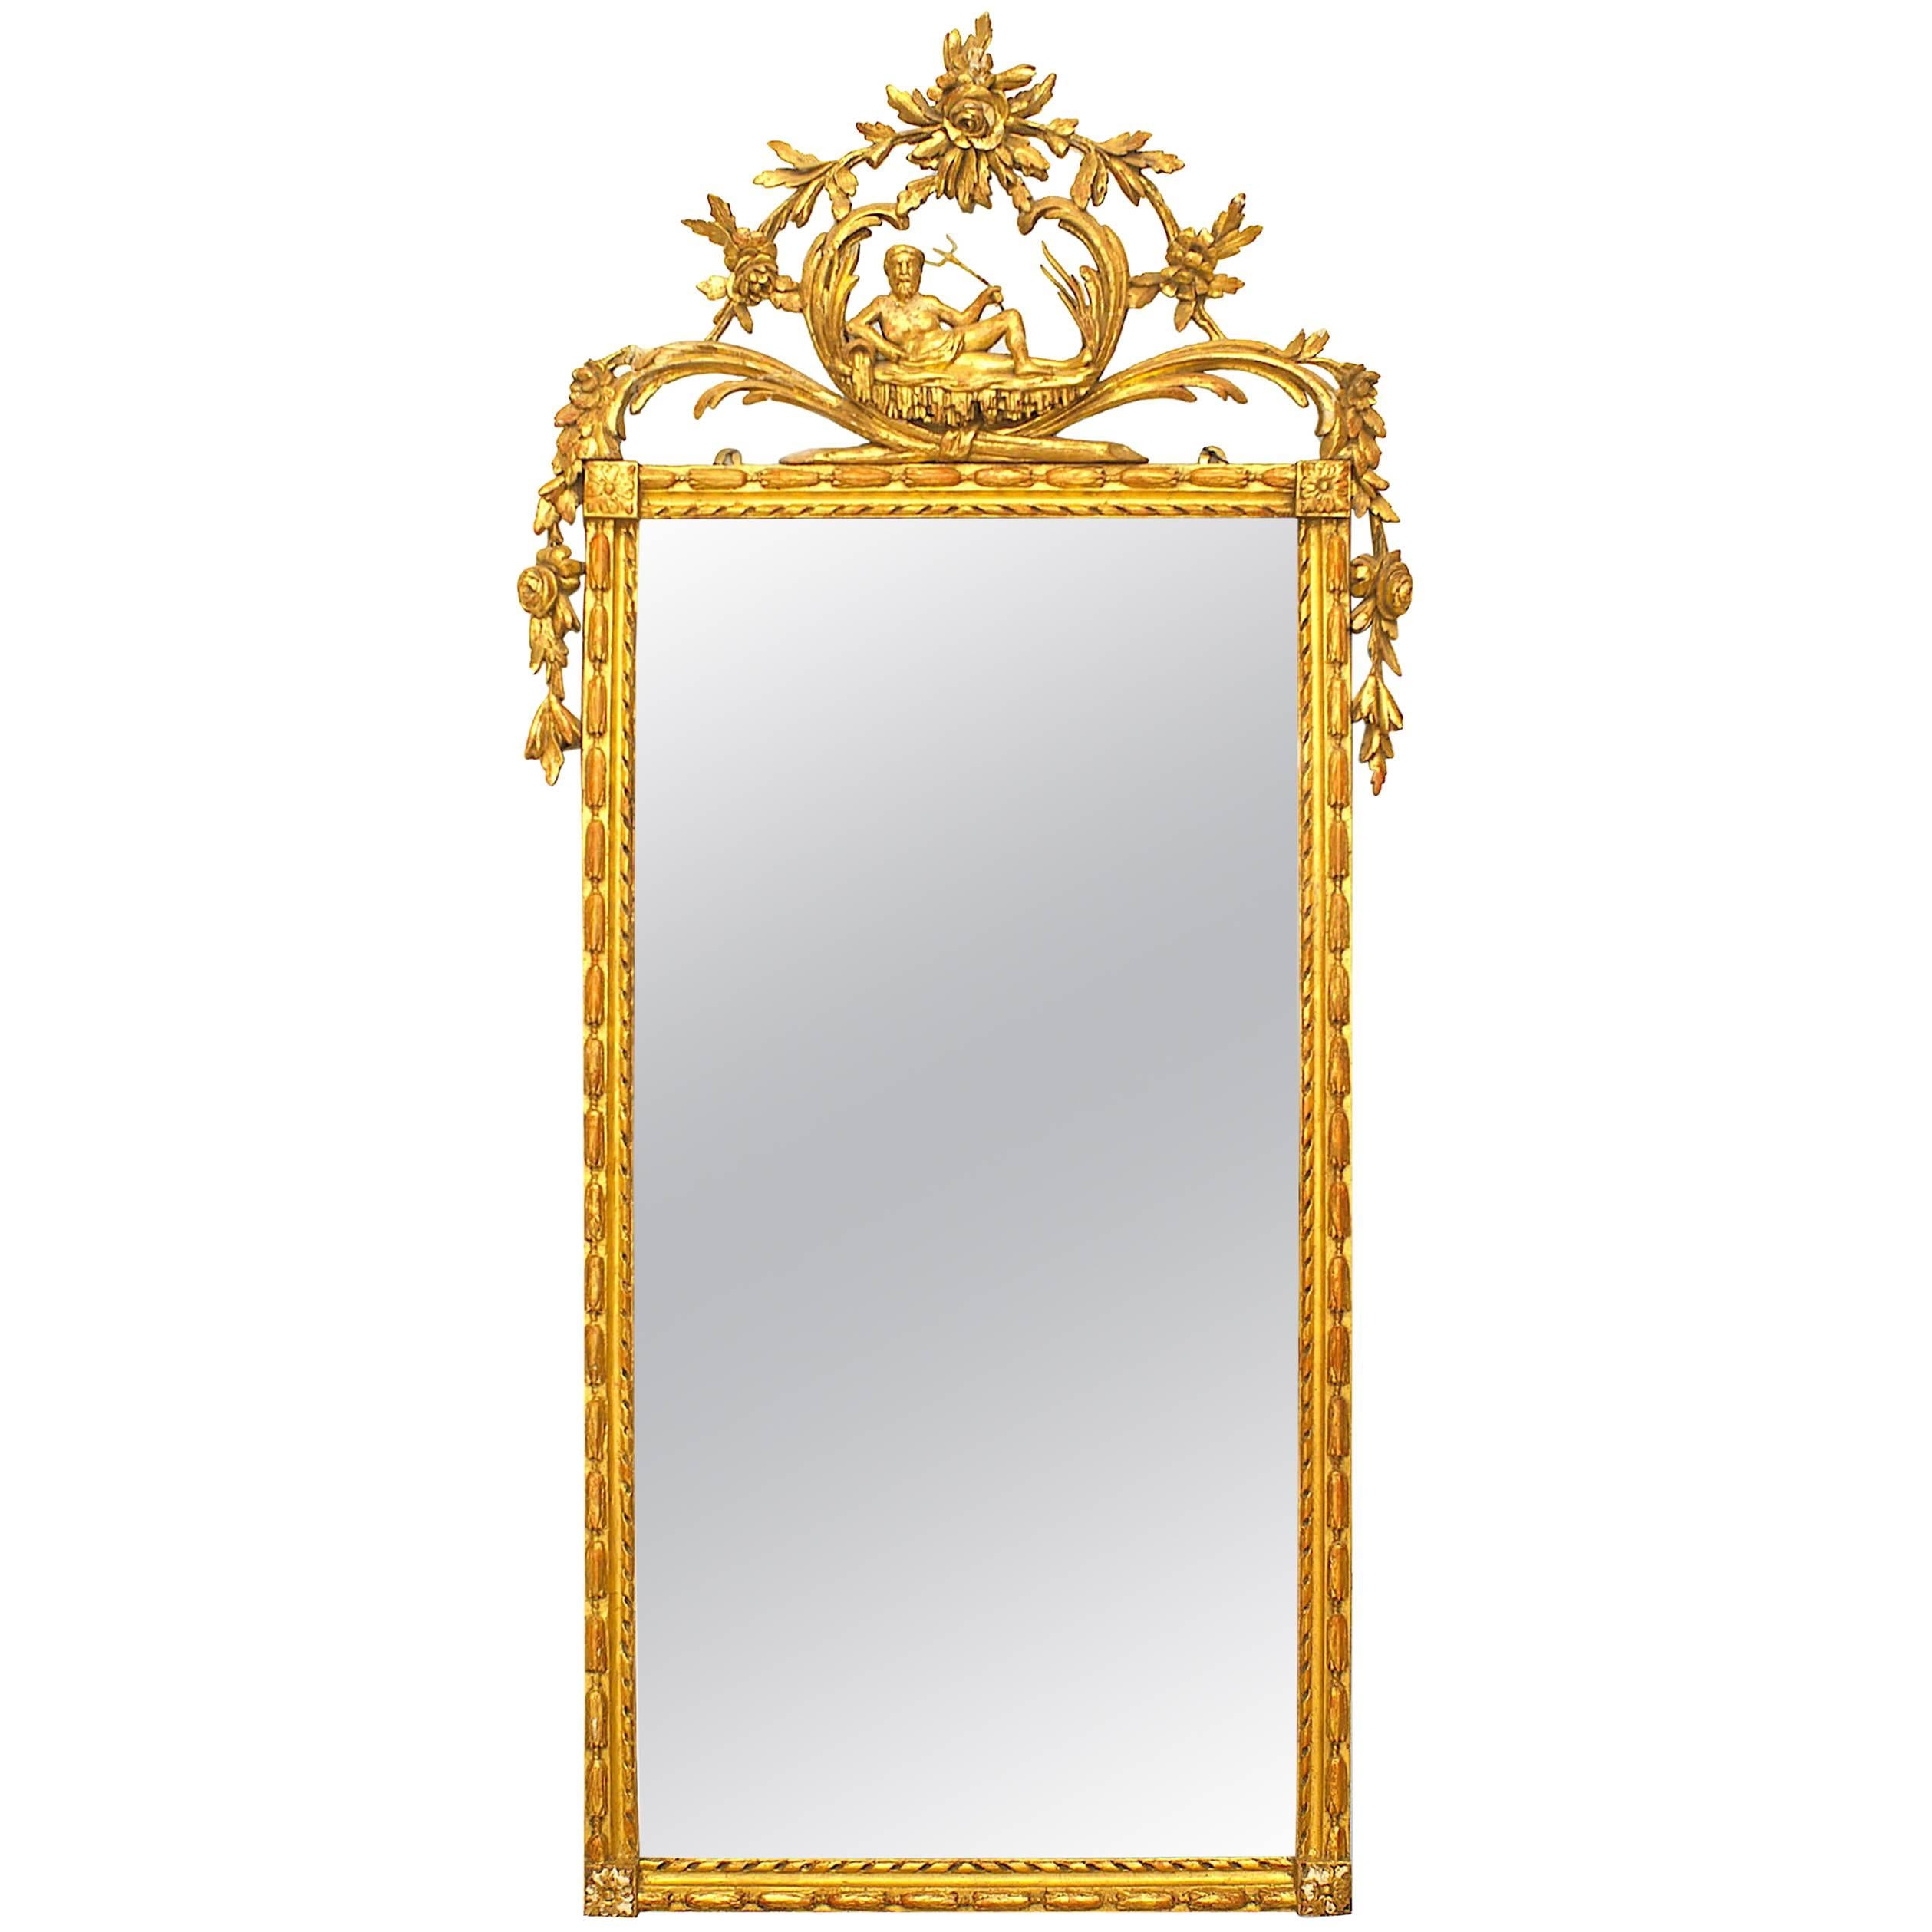 Italian Neoclassic Carved Giltwood Vertical Mirror 'Late 18th Century' For Sale